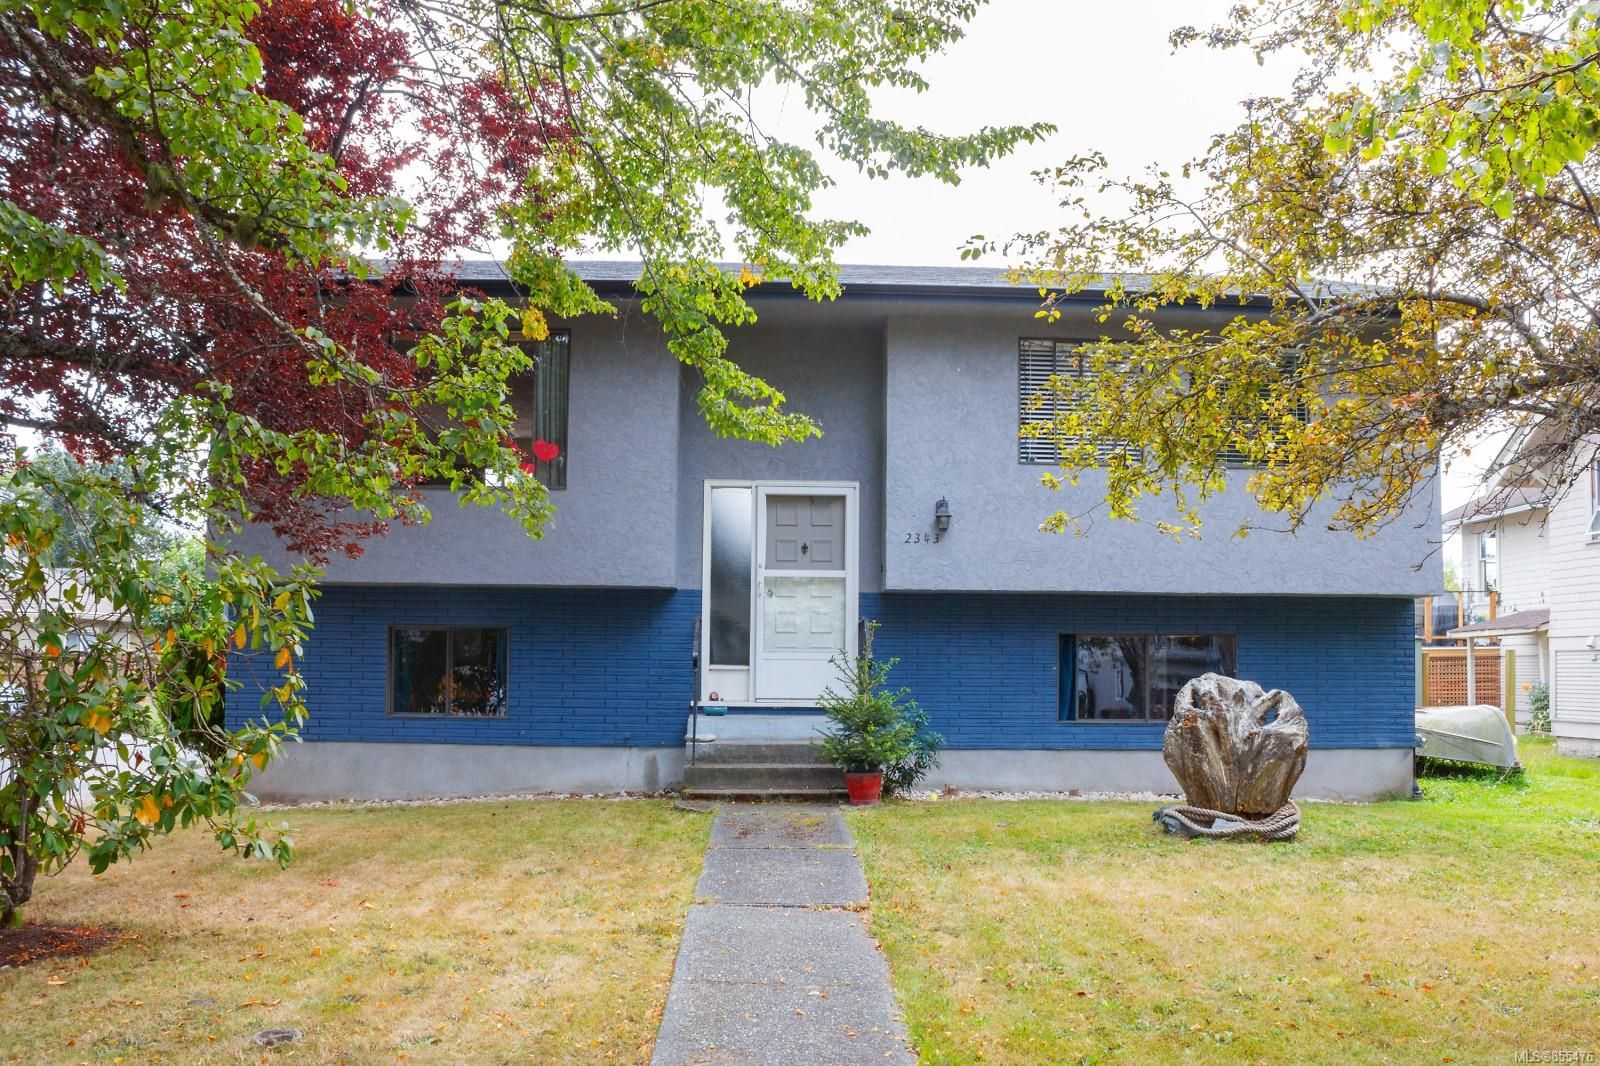 I have sold a property at 2343 Orchard Ave
